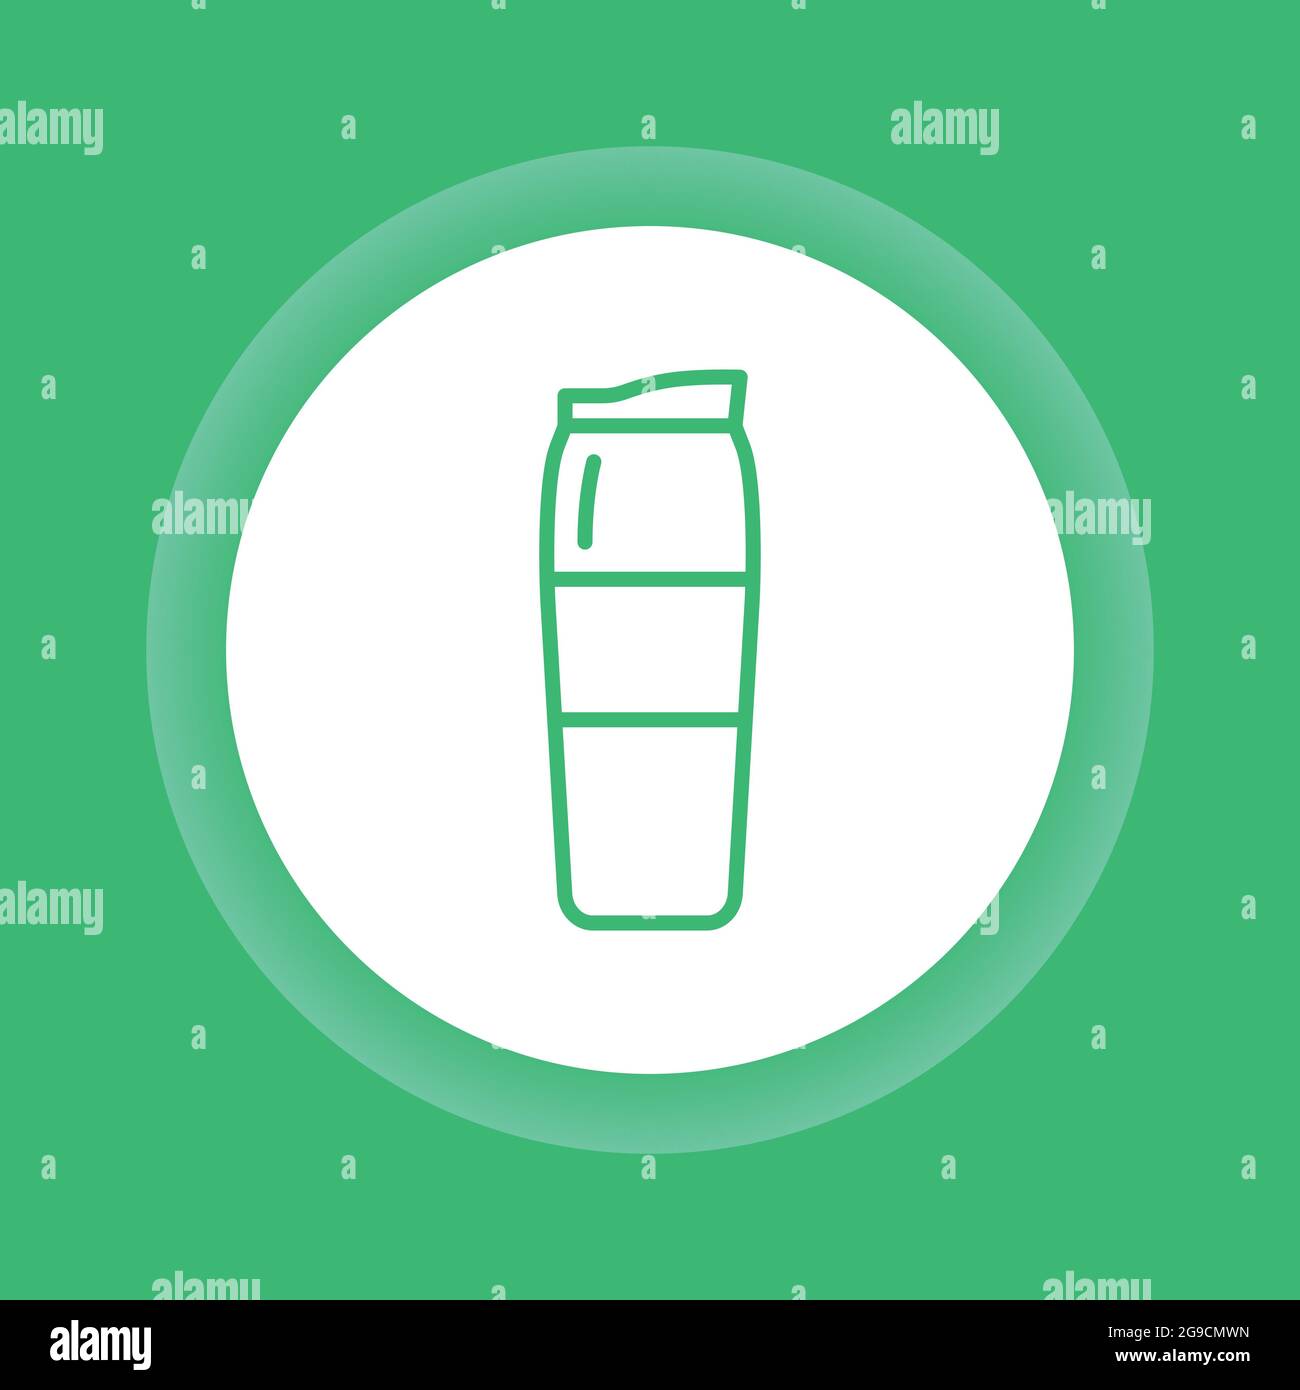 https://c8.alamy.com/comp/2G9CMWN/reusable-glass-coffee-or-tea-cup-color-button-icon-thermos-for-take-away-zero-waste-lifestyle-outline-pictogram-for-web-page-mobile-app-promo-2G9CMWN.jpg